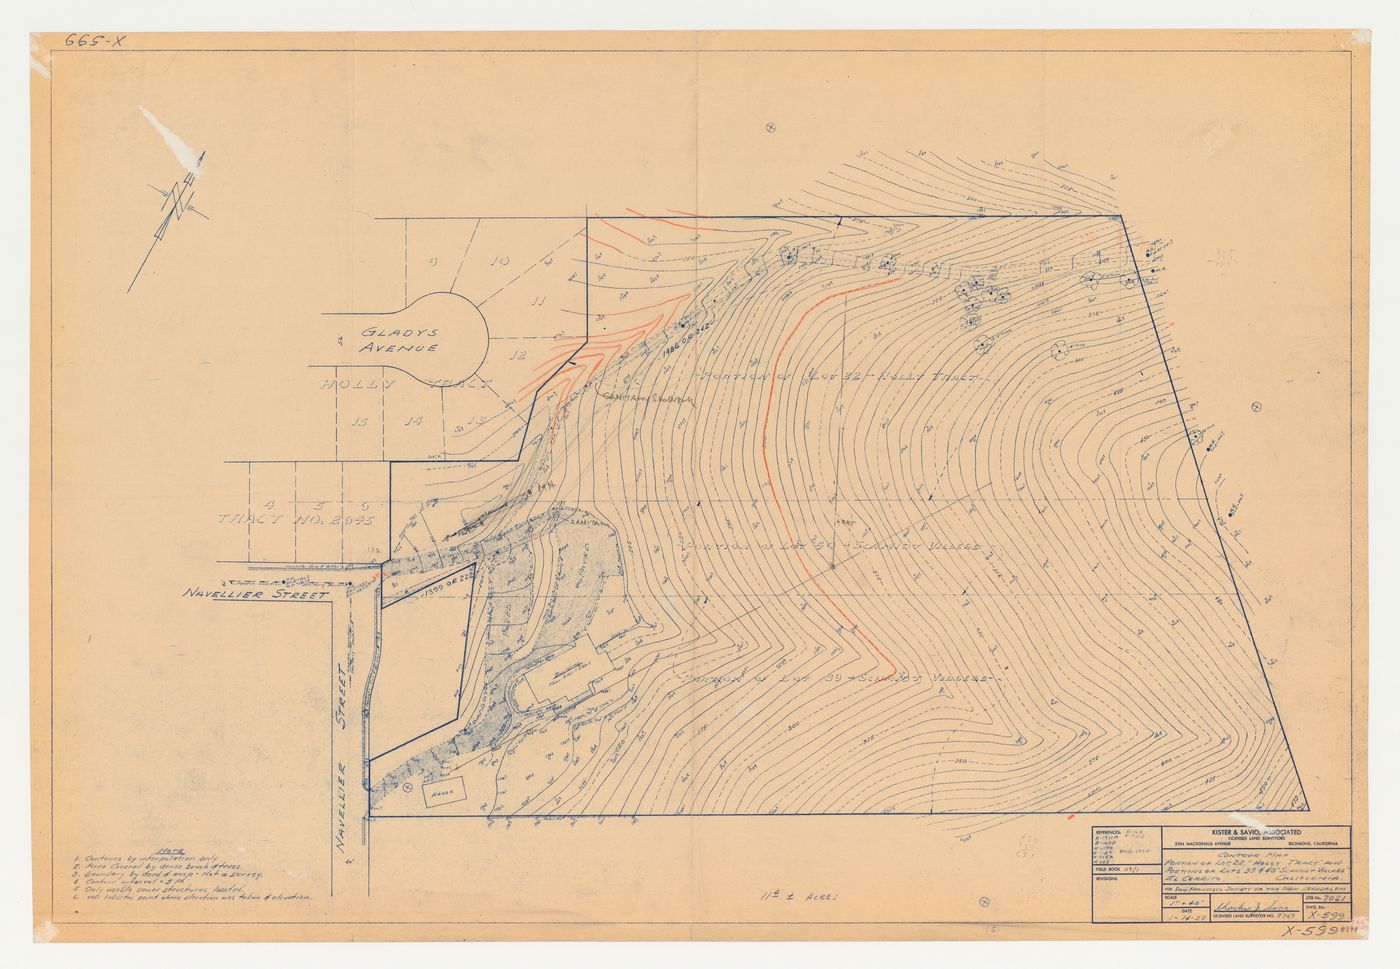 Swedenborg Memorial Chapel, El Cerrito, California: Sketches for sewage pipe, road layout and grading on a contour map of lot 39 and part of lot 40